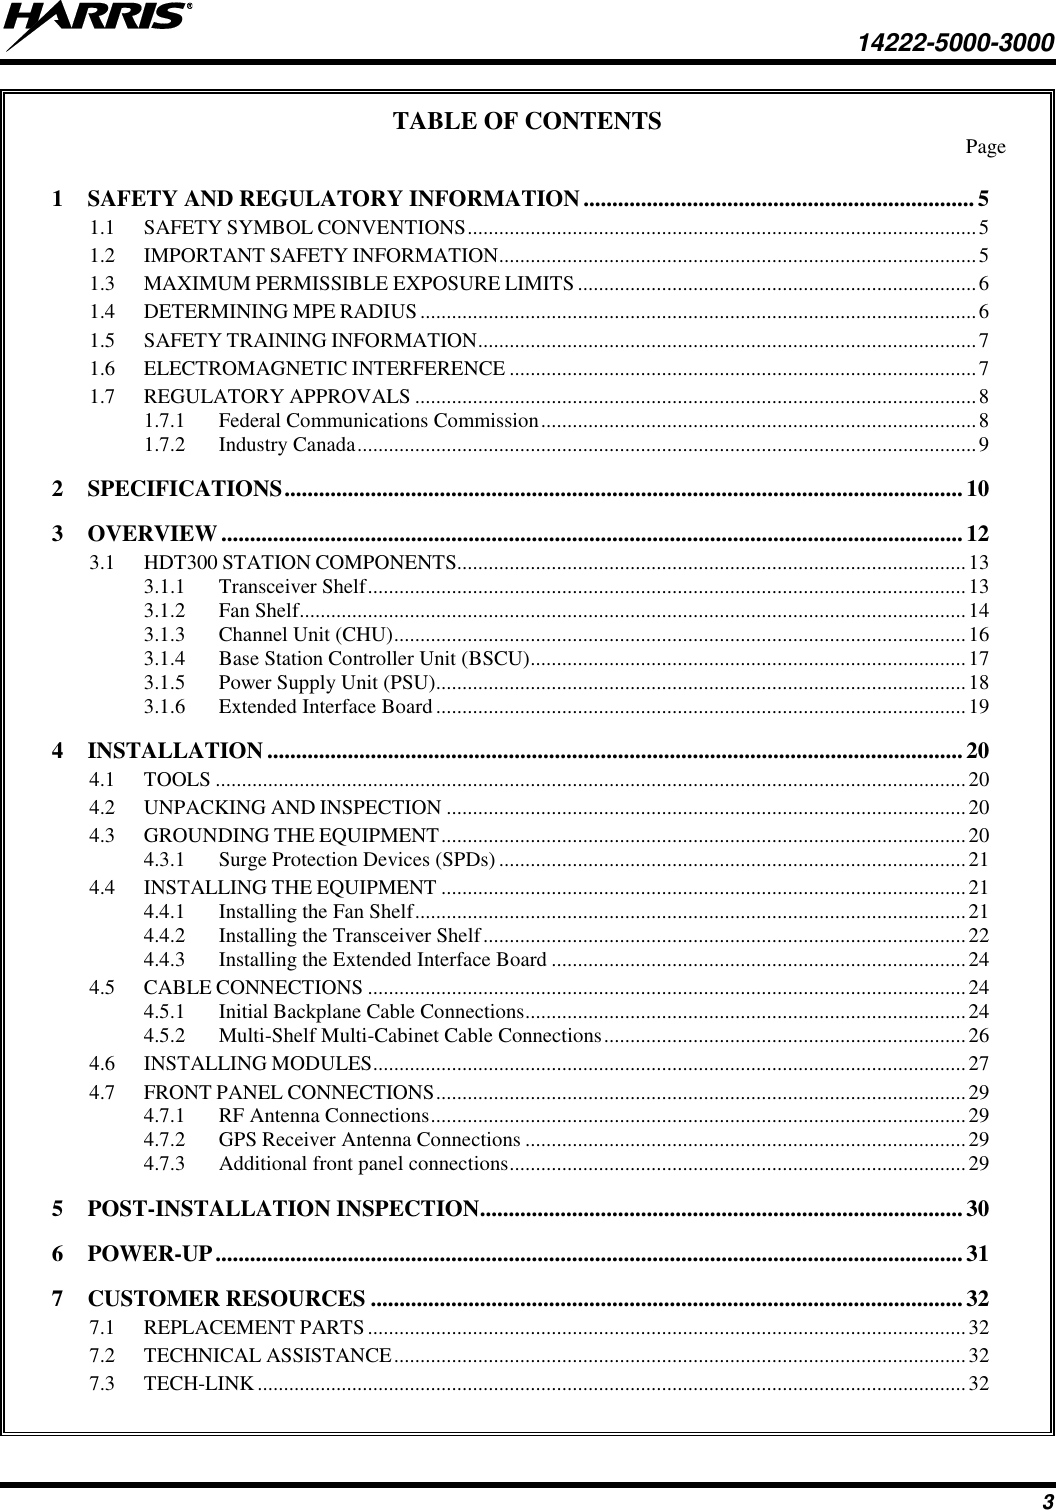     14222-5000-3000 3 TABLE OF CONTENTS   Page 1  SAFETY AND REGULATORY INFORMATION .................................................................... 5 1.1  SAFETY SYMBOL CONVENTIONS ................................................................................................. 5 1.2  IMPORTANT SAFETY INFORMATION ........................................................................................... 5 1.3  MAXIMUM PERMISSIBLE EXPOSURE LIMITS ............................................................................ 6 1.4  DETERMINING MPE RADIUS .......................................................................................................... 6 1.5  SAFETY TRAINING INFORMATION ............................................................................................... 7 1.6  ELECTROMAGNETIC INTERFERENCE ......................................................................................... 7 1.7  REGULATORY APPROVALS ........................................................................................................... 8 1.7.1  Federal Communications Commission ................................................................................... 8 1.7.2  Industry Canada ...................................................................................................................... 9 2  SPECIFICATIONS ...................................................................................................................... 10 3  OVERVIEW ................................................................................................................................. 12 3.1  HDT300 STATION COMPONENTS................................................................................................. 13 3.1.1  Transceiver Shelf .................................................................................................................. 13 3.1.2  Fan Shelf............................................................................................................................... 14 3.1.3  Channel Unit (CHU) ............................................................................................................. 16 3.1.4  Base Station Controller Unit (BSCU) ................................................................................... 17 3.1.5  Power Supply Unit (PSU)..................................................................................................... 18 3.1.6  Extended Interface Board ..................................................................................................... 19 4  INSTALLATION ......................................................................................................................... 20 4.1  TOOLS ............................................................................................................................................... 20 4.2  UNPACKING AND INSPECTION ................................................................................................... 20 4.3  GROUNDING THE EQUIPMENT .................................................................................................... 20 4.3.1  Surge Protection Devices (SPDs) ......................................................................................... 21 4.4  INSTALLING THE EQUIPMENT .................................................................................................... 21 4.4.1  Installing the Fan Shelf ......................................................................................................... 21 4.4.2  Installing the Transceiver Shelf ............................................................................................ 22 4.4.3  Installing the Extended Interface Board ............................................................................... 24 4.5  CABLE CONNECTIONS .................................................................................................................. 24 4.5.1  Initial Backplane Cable Connections .................................................................................... 24 4.5.2  Multi-Shelf Multi-Cabinet Cable Connections ..................................................................... 26 4.6  INSTALLING MODULES ................................................................................................................. 27 4.7  FRONT PANEL CONNECTIONS ..................................................................................................... 29 4.7.1  RF Antenna Connections ...................................................................................................... 29 4.7.2  GPS Receiver Antenna Connections .................................................................................... 29 4.7.3  Additional front panel connections ....................................................................................... 29 5  POST-INSTALLATION INSPECTION .................................................................................... 30 6  POWER-UP .................................................................................................................................. 31 7  CUSTOMER RESOURCES ....................................................................................................... 32 7.1  REPLACEMENT PARTS .................................................................................................................. 32 7.2  TECHNICAL ASSISTANCE ............................................................................................................. 32 7.3  TECH-LINK ....................................................................................................................................... 32  